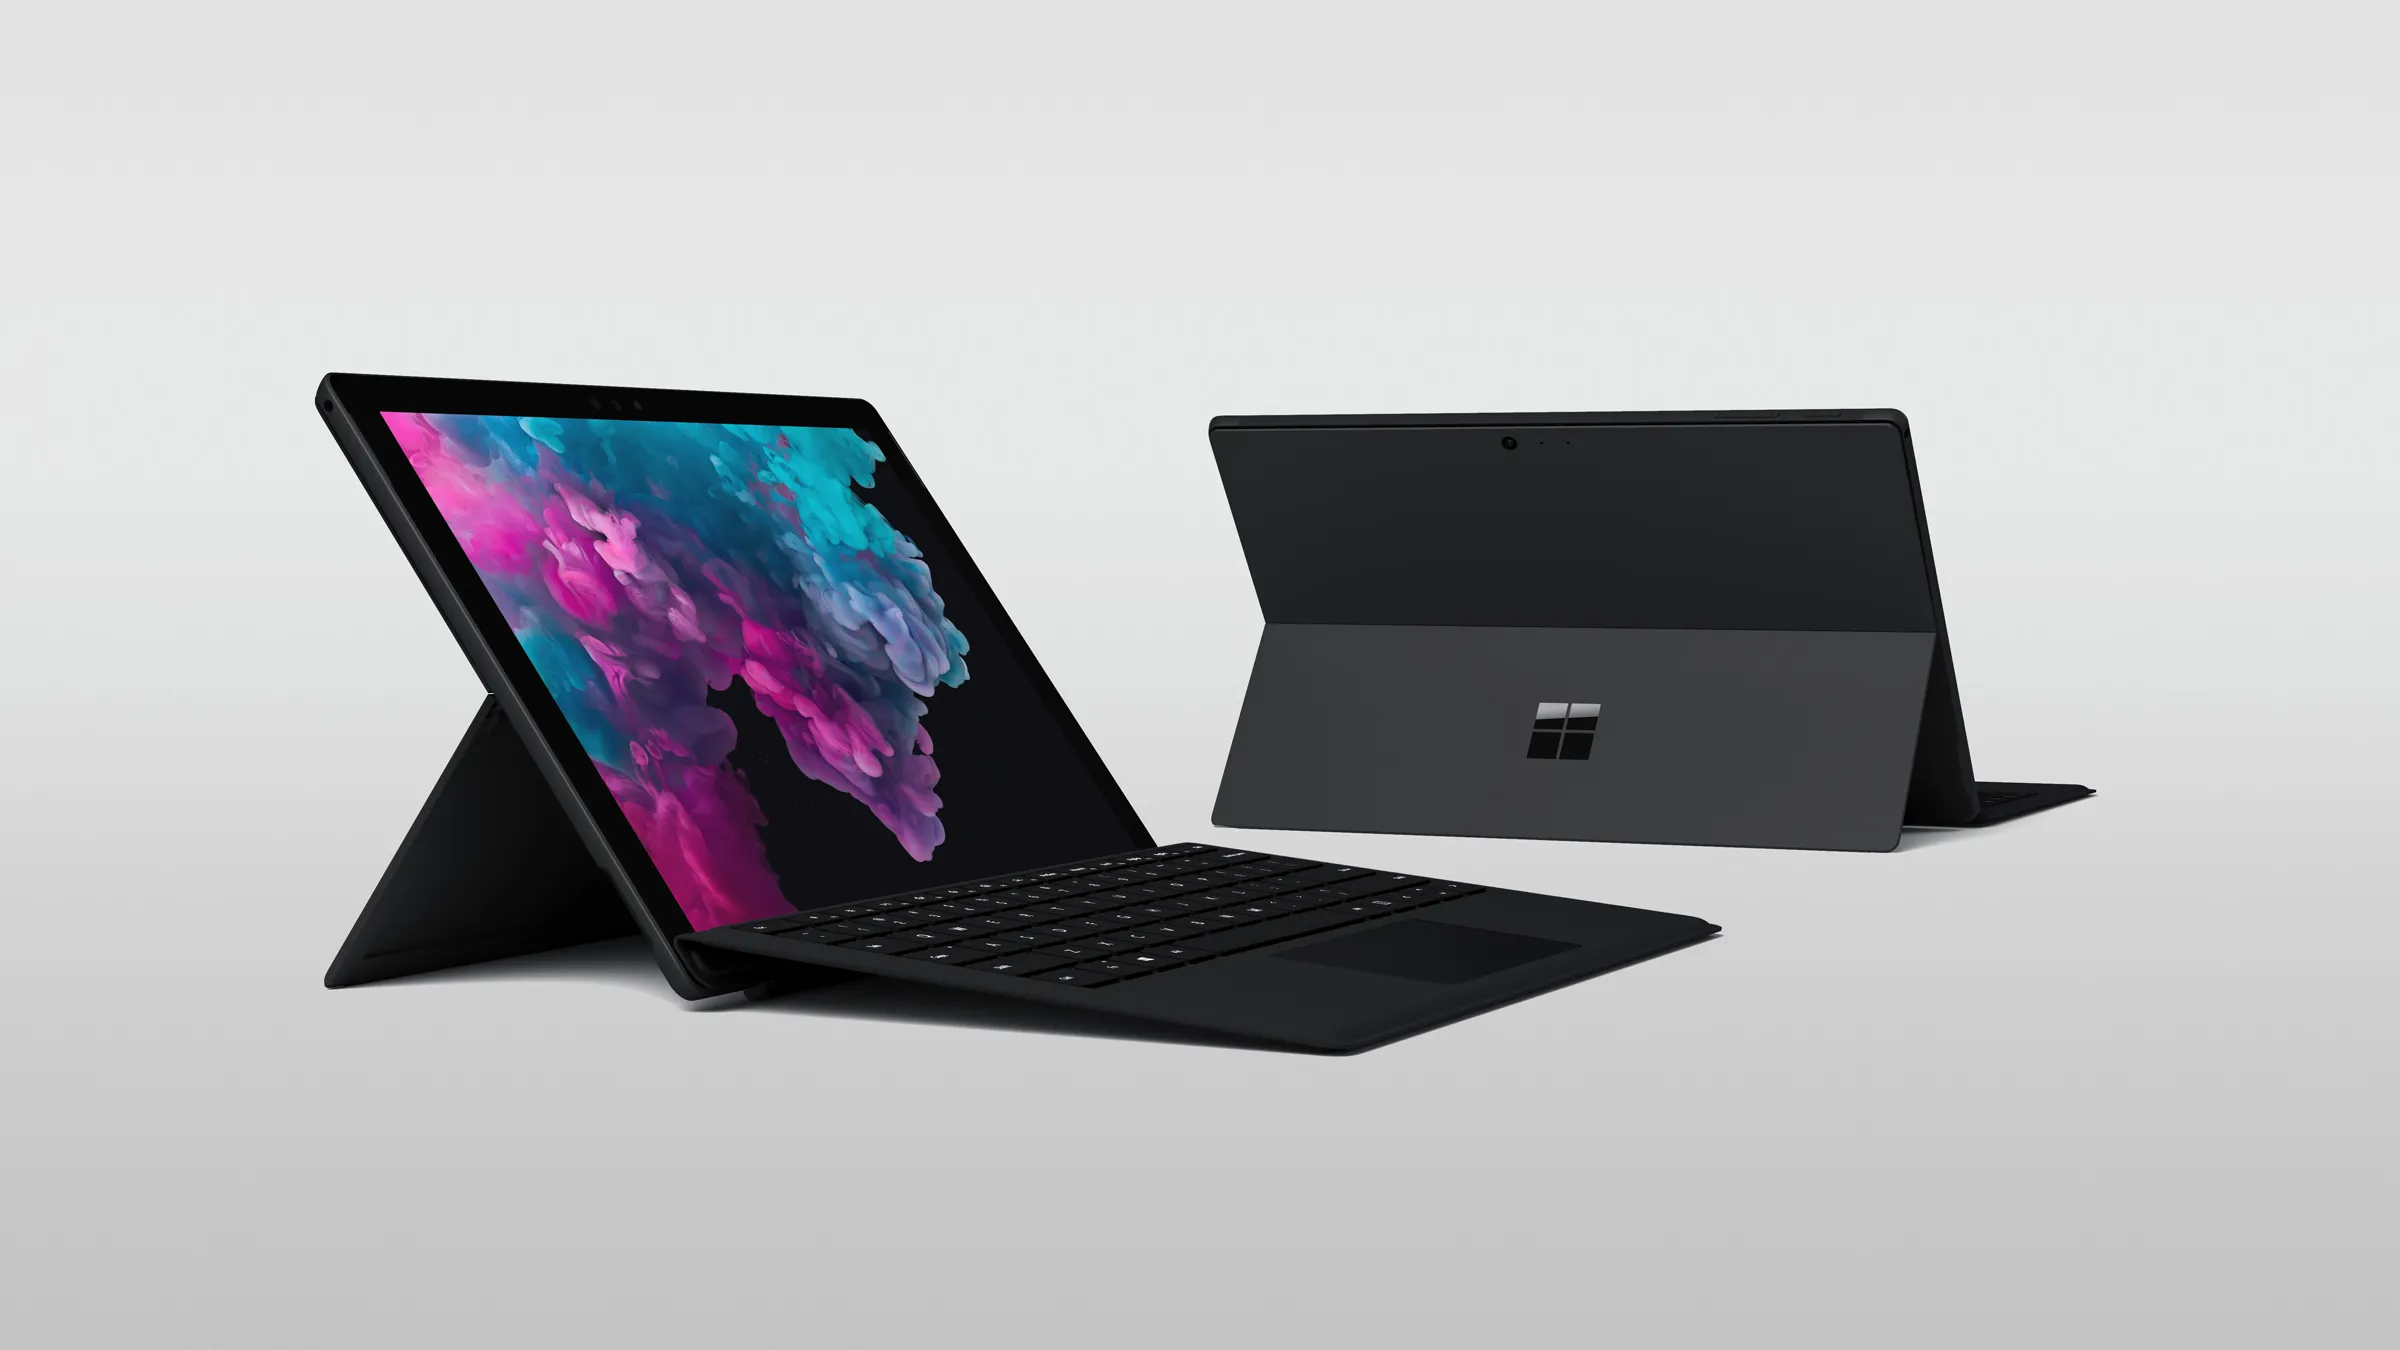 Microsoft Surface Pro 6 will no longer receive firmware updates